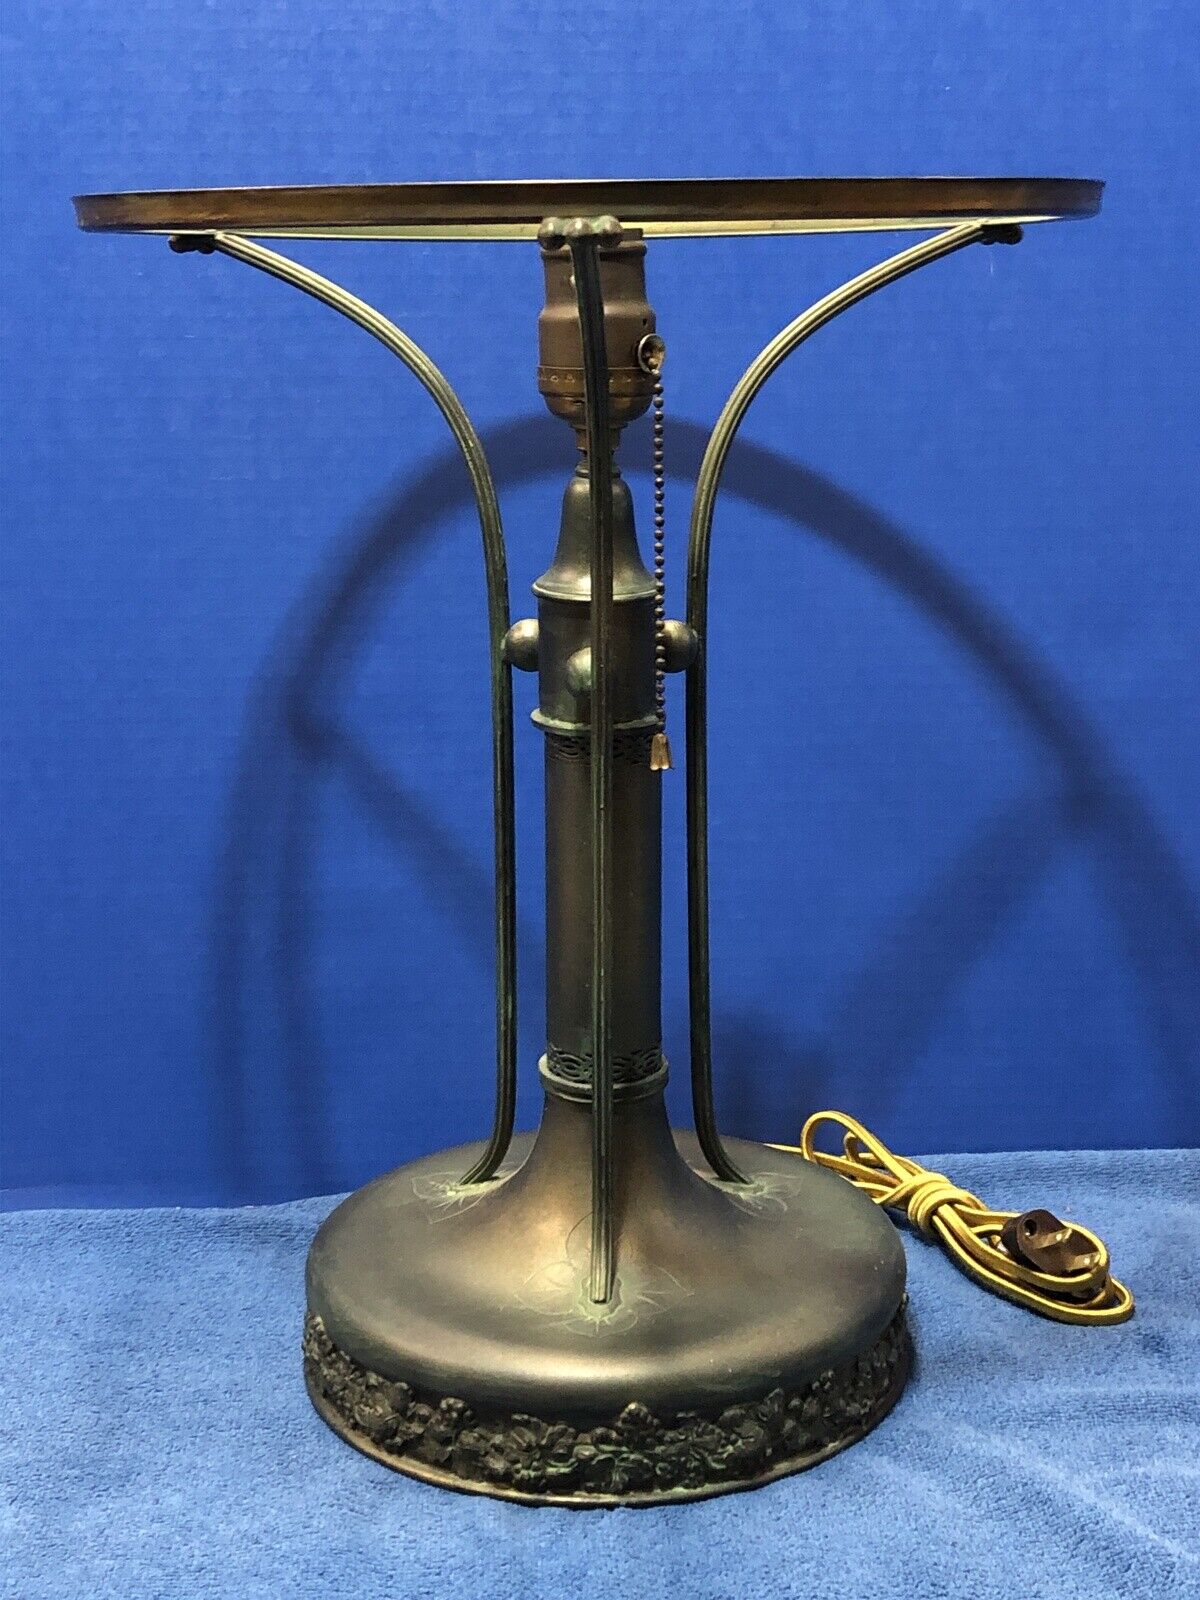 PAIRPOINT Authentic SIGNED #3082 GRAPES Lamp BASE 12” Fitter BRASS Shade RING